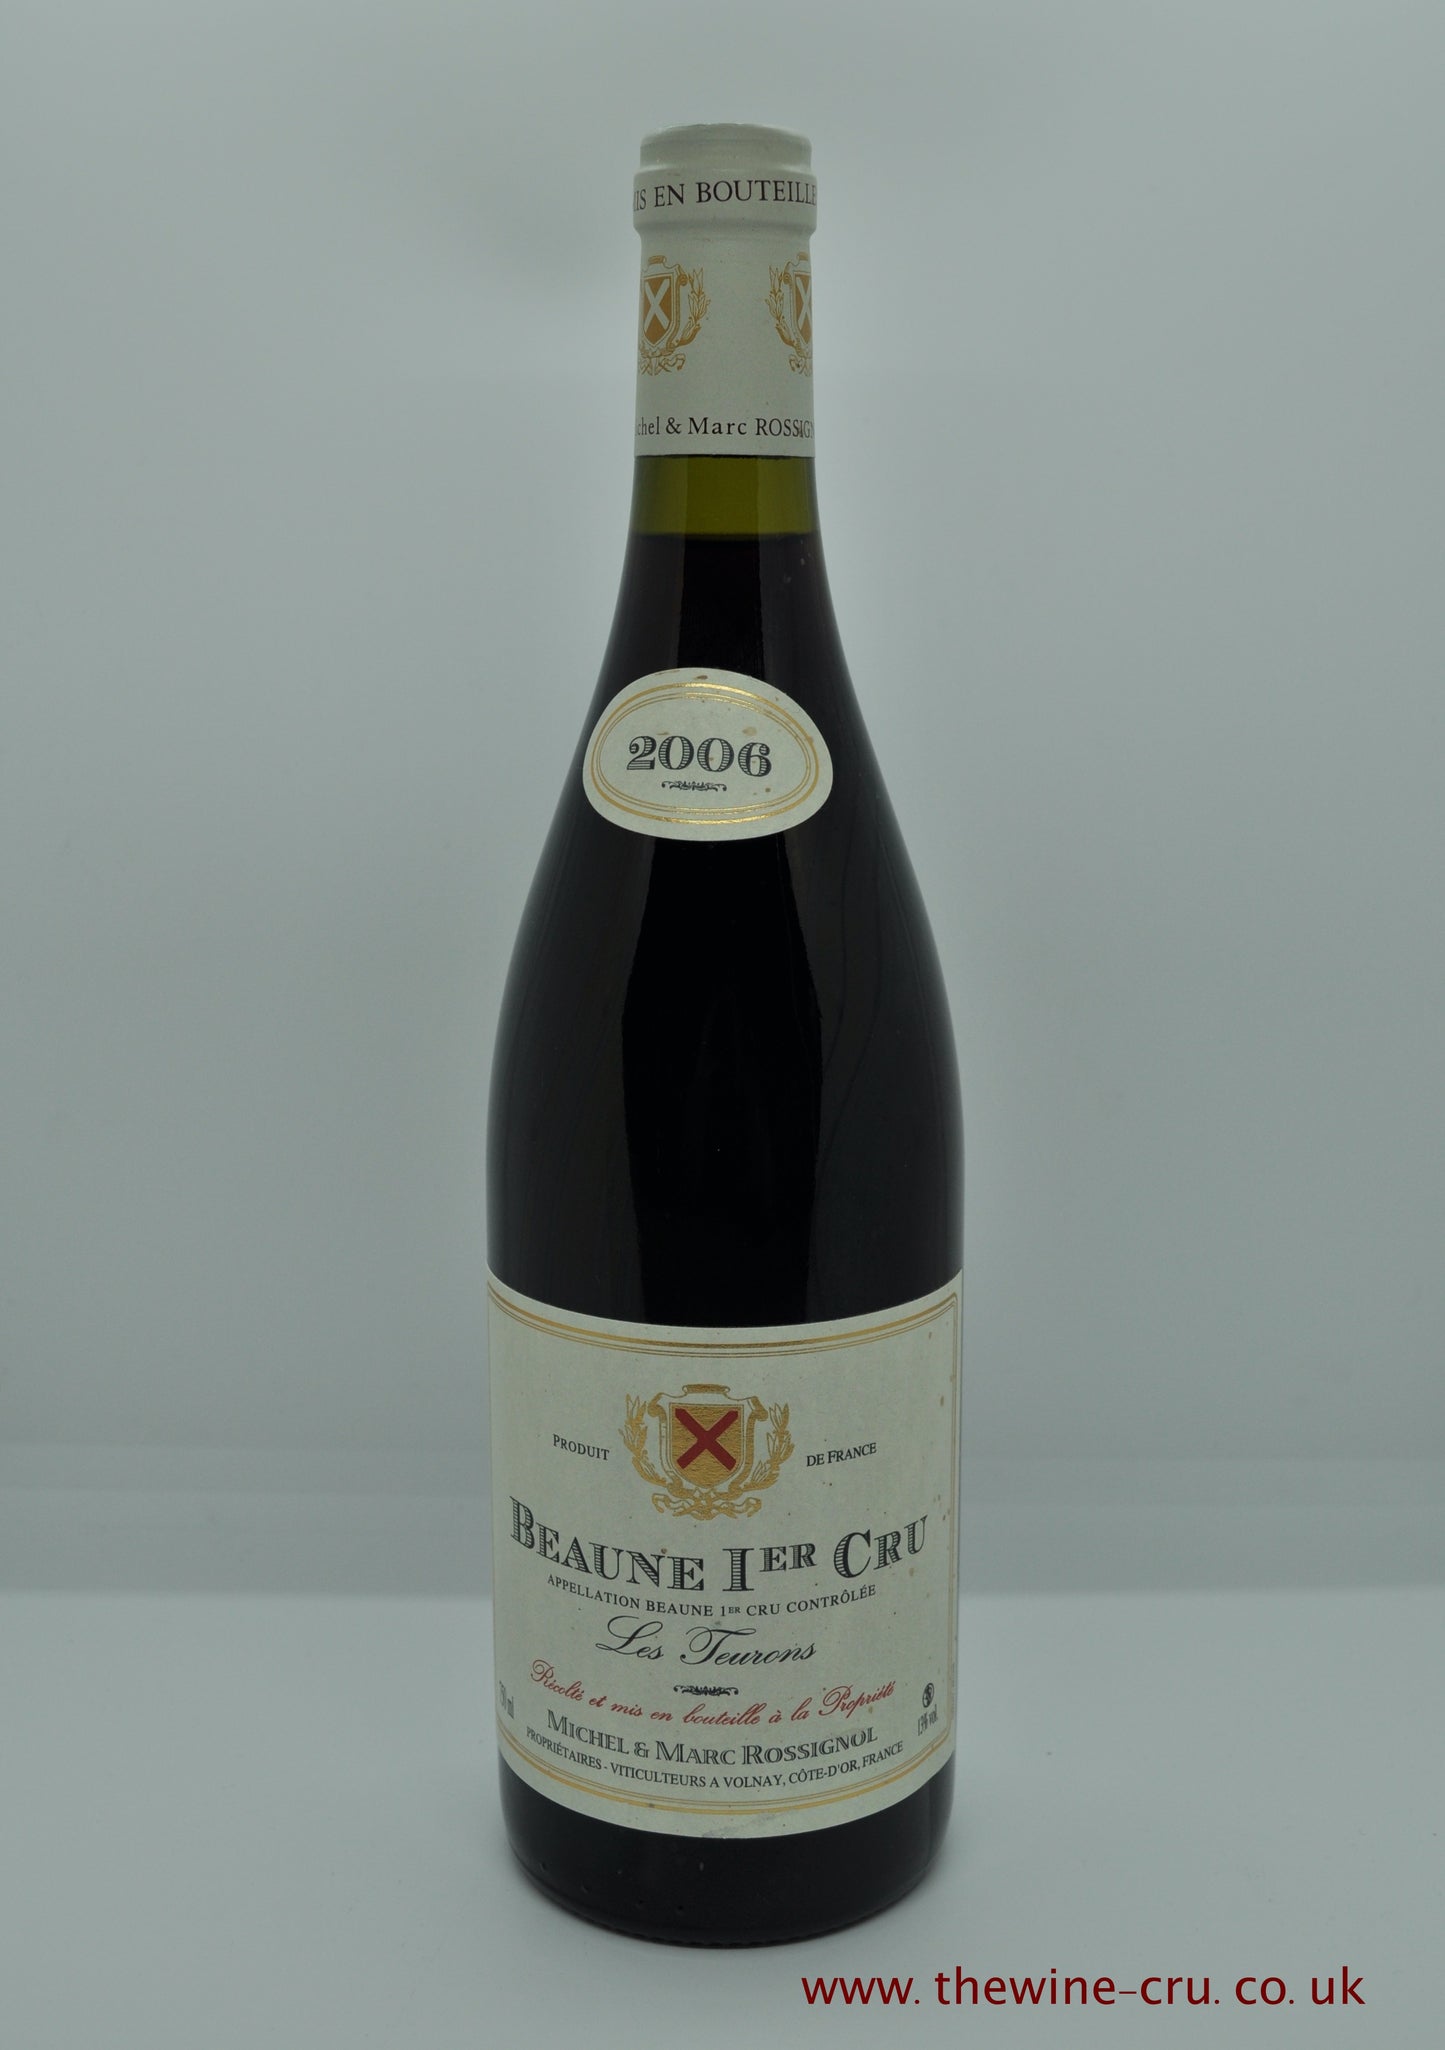 2006 vintage red wine. Beaune 1er Cru Les Teurons M & M Rossignol 2006. France Burgundy. Immediate delivery. free local delivery.